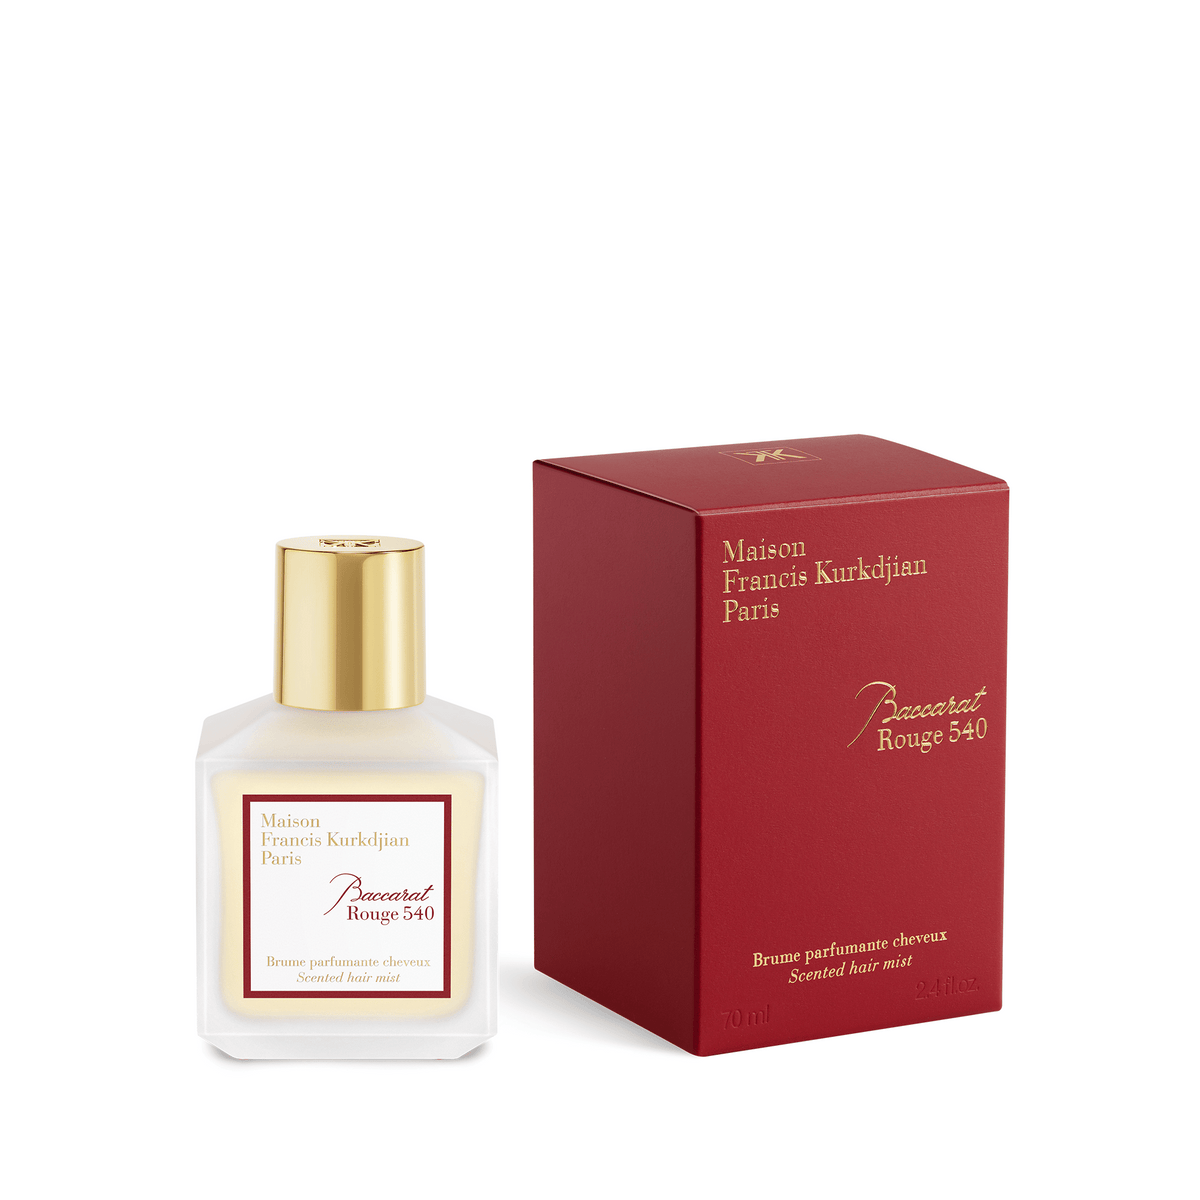 Primary Image of  Baccarat Rouge EDP 540 Scented Hair Mist